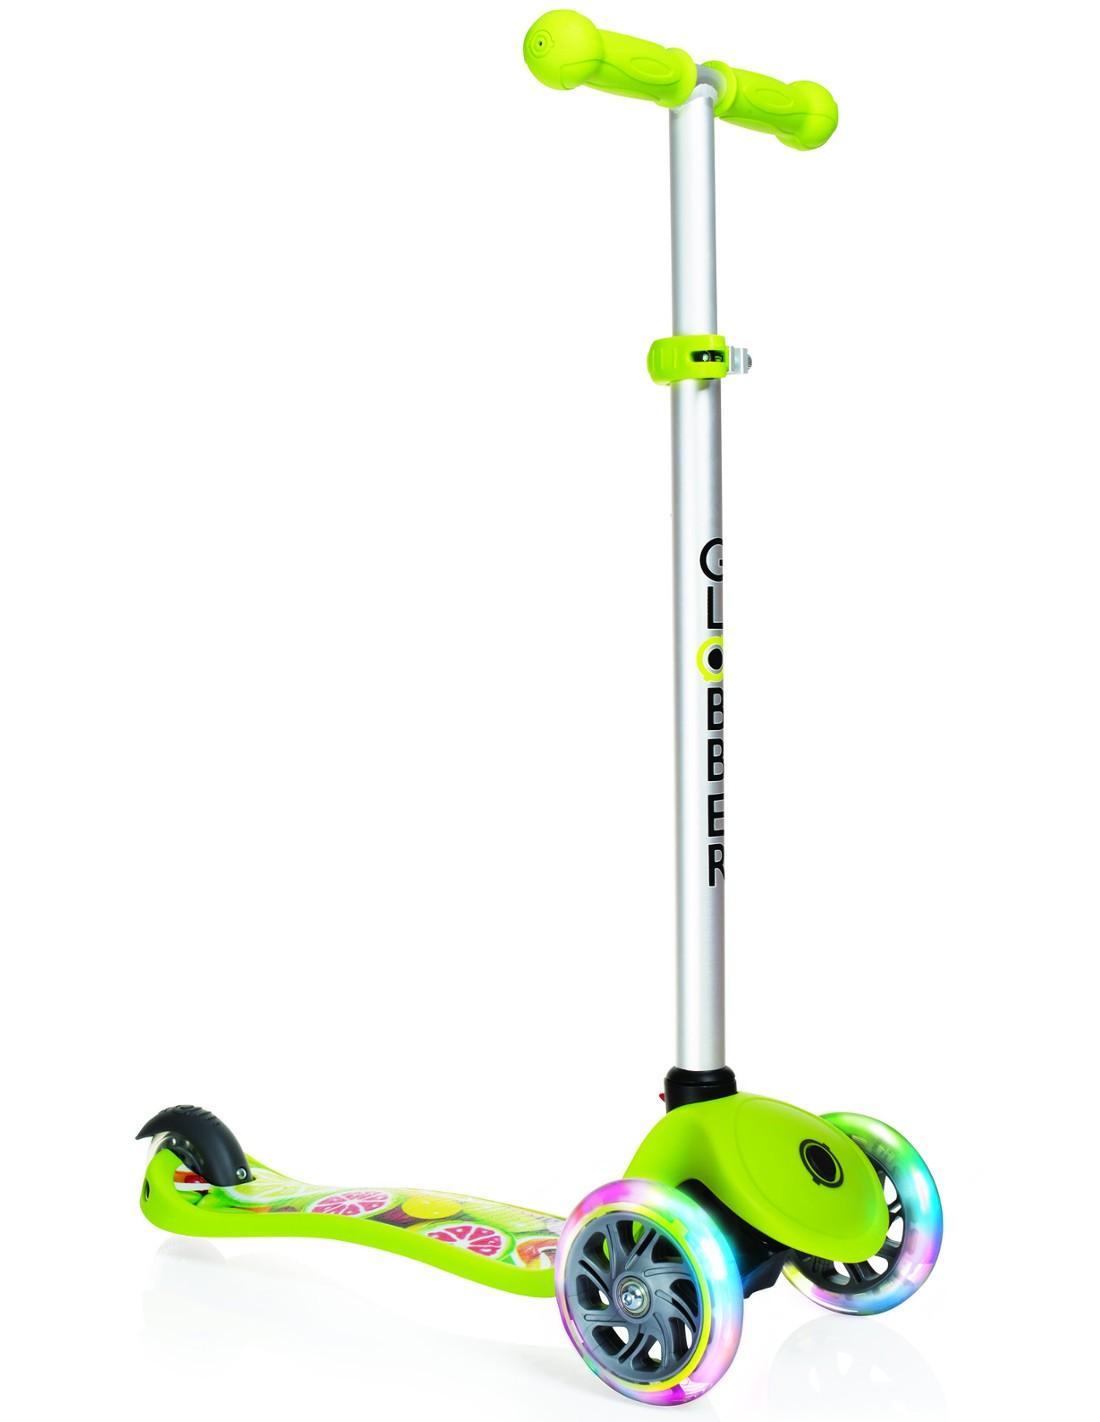 -PRIMO FANTASY LIGHTS - 3 Wheel Scooter for Kids - green with print fruit - MoonyBoon